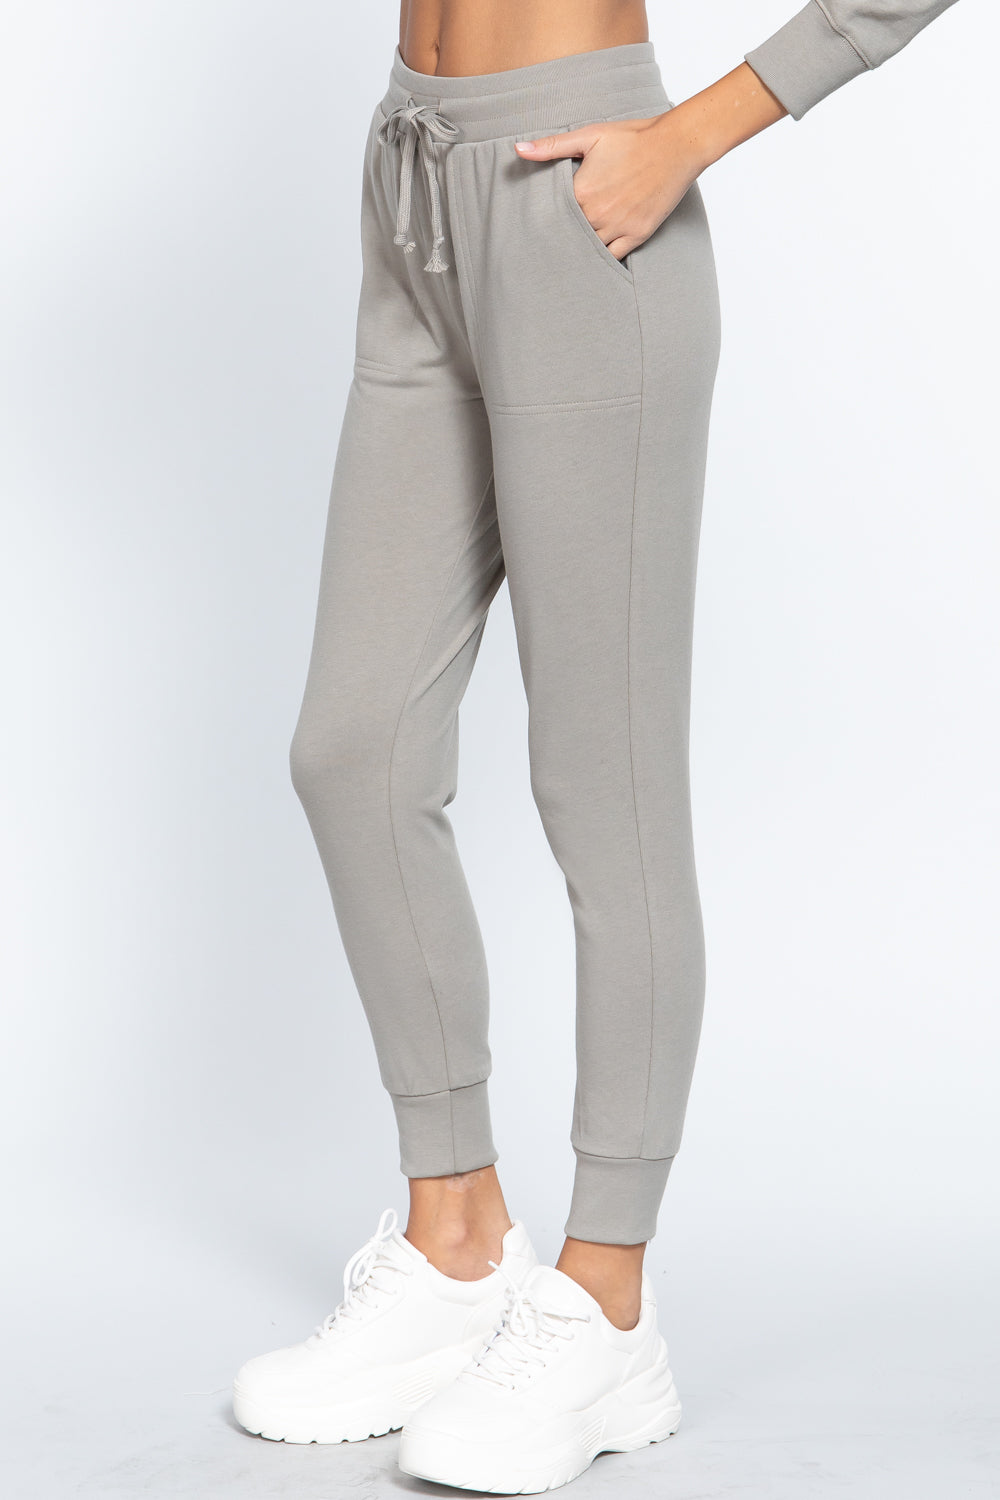 Waist Band Long Sweatpants With Pockets 3 king-general-store-5710.myshopify.com